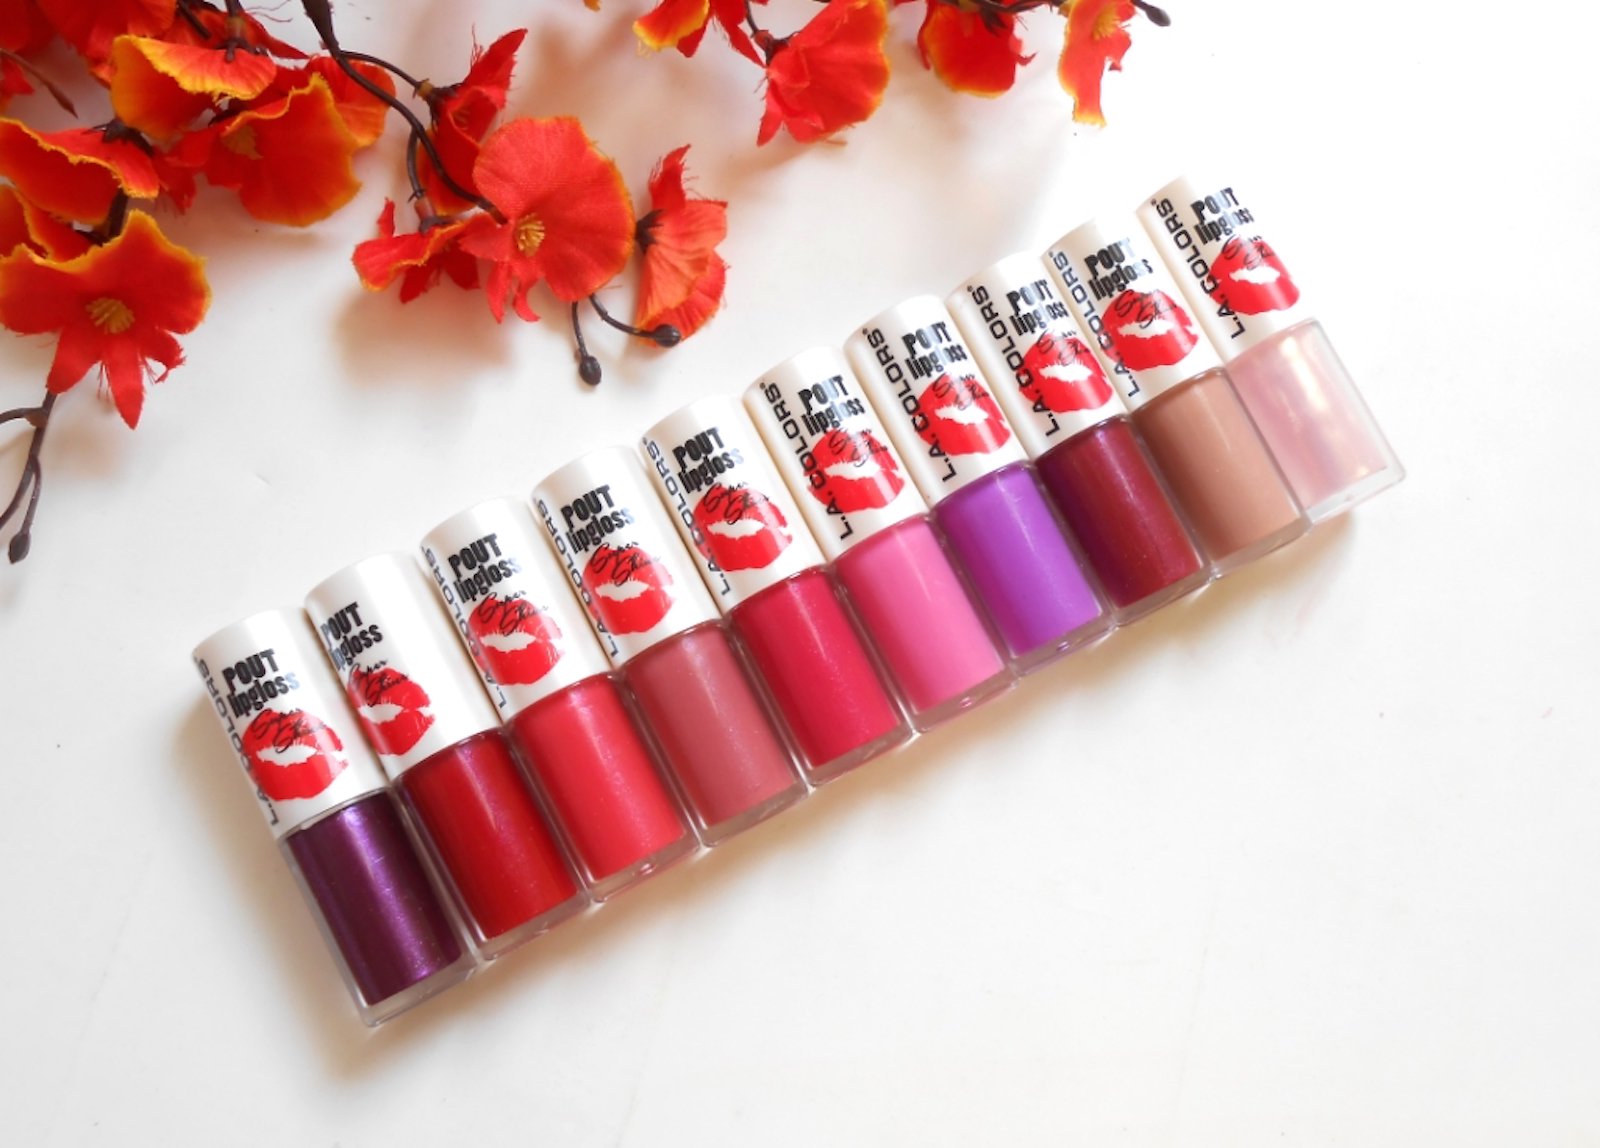 LA Colors Pout Supershine Lip Gloss - Top 15 Popular Lip Gloss for Cosmo Girls to Stock this Season